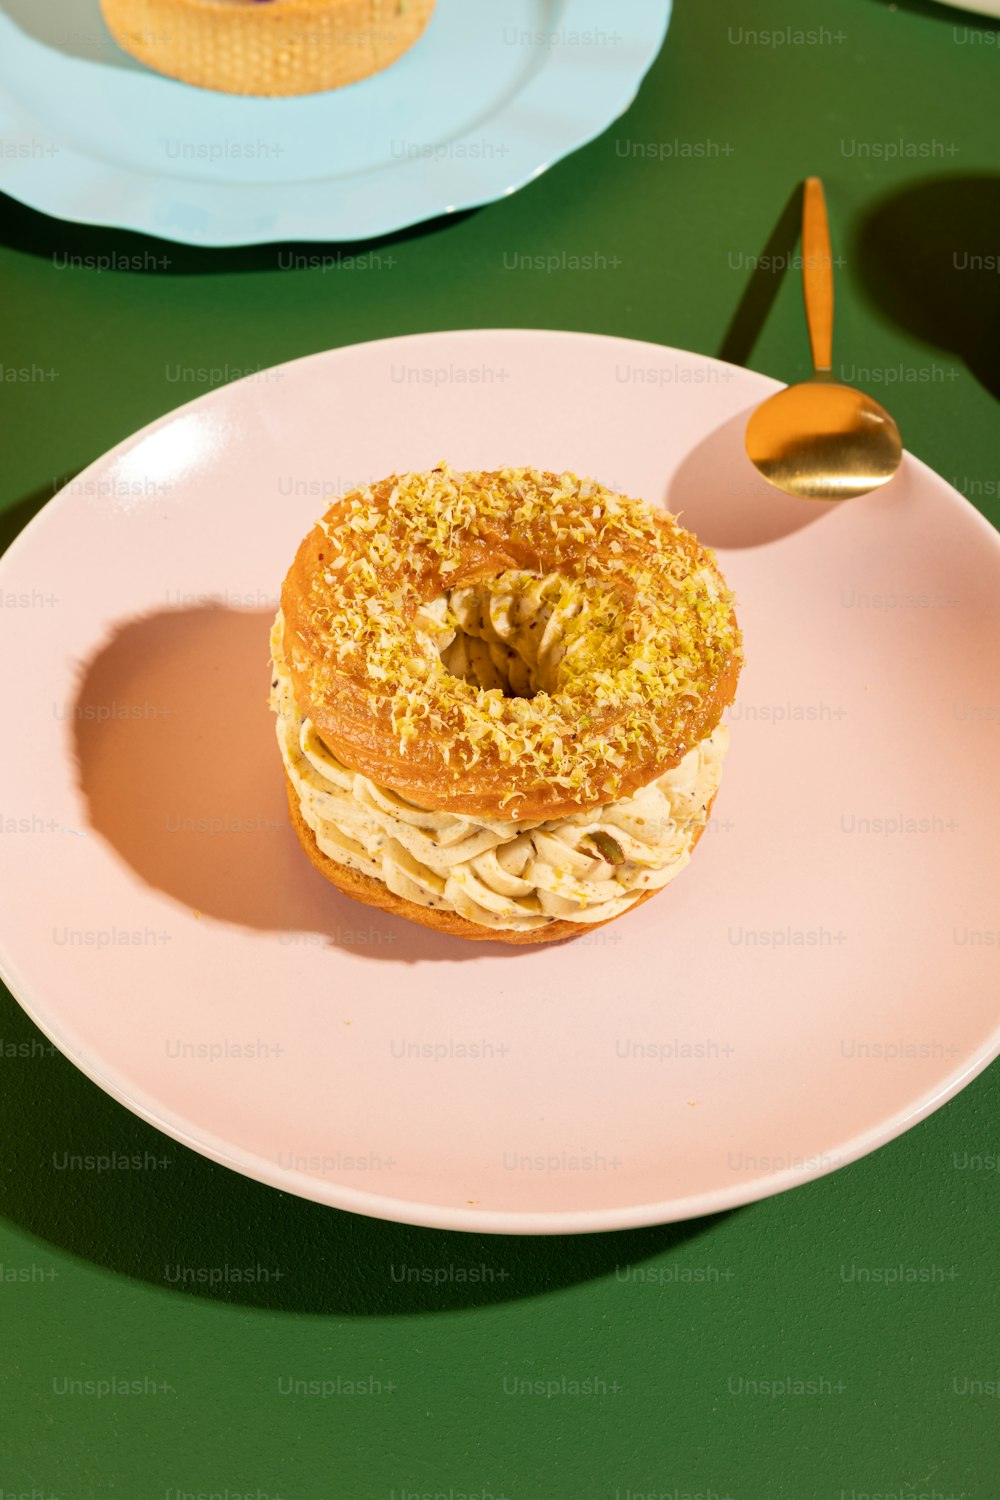 a plate with a doughnut on it on a table